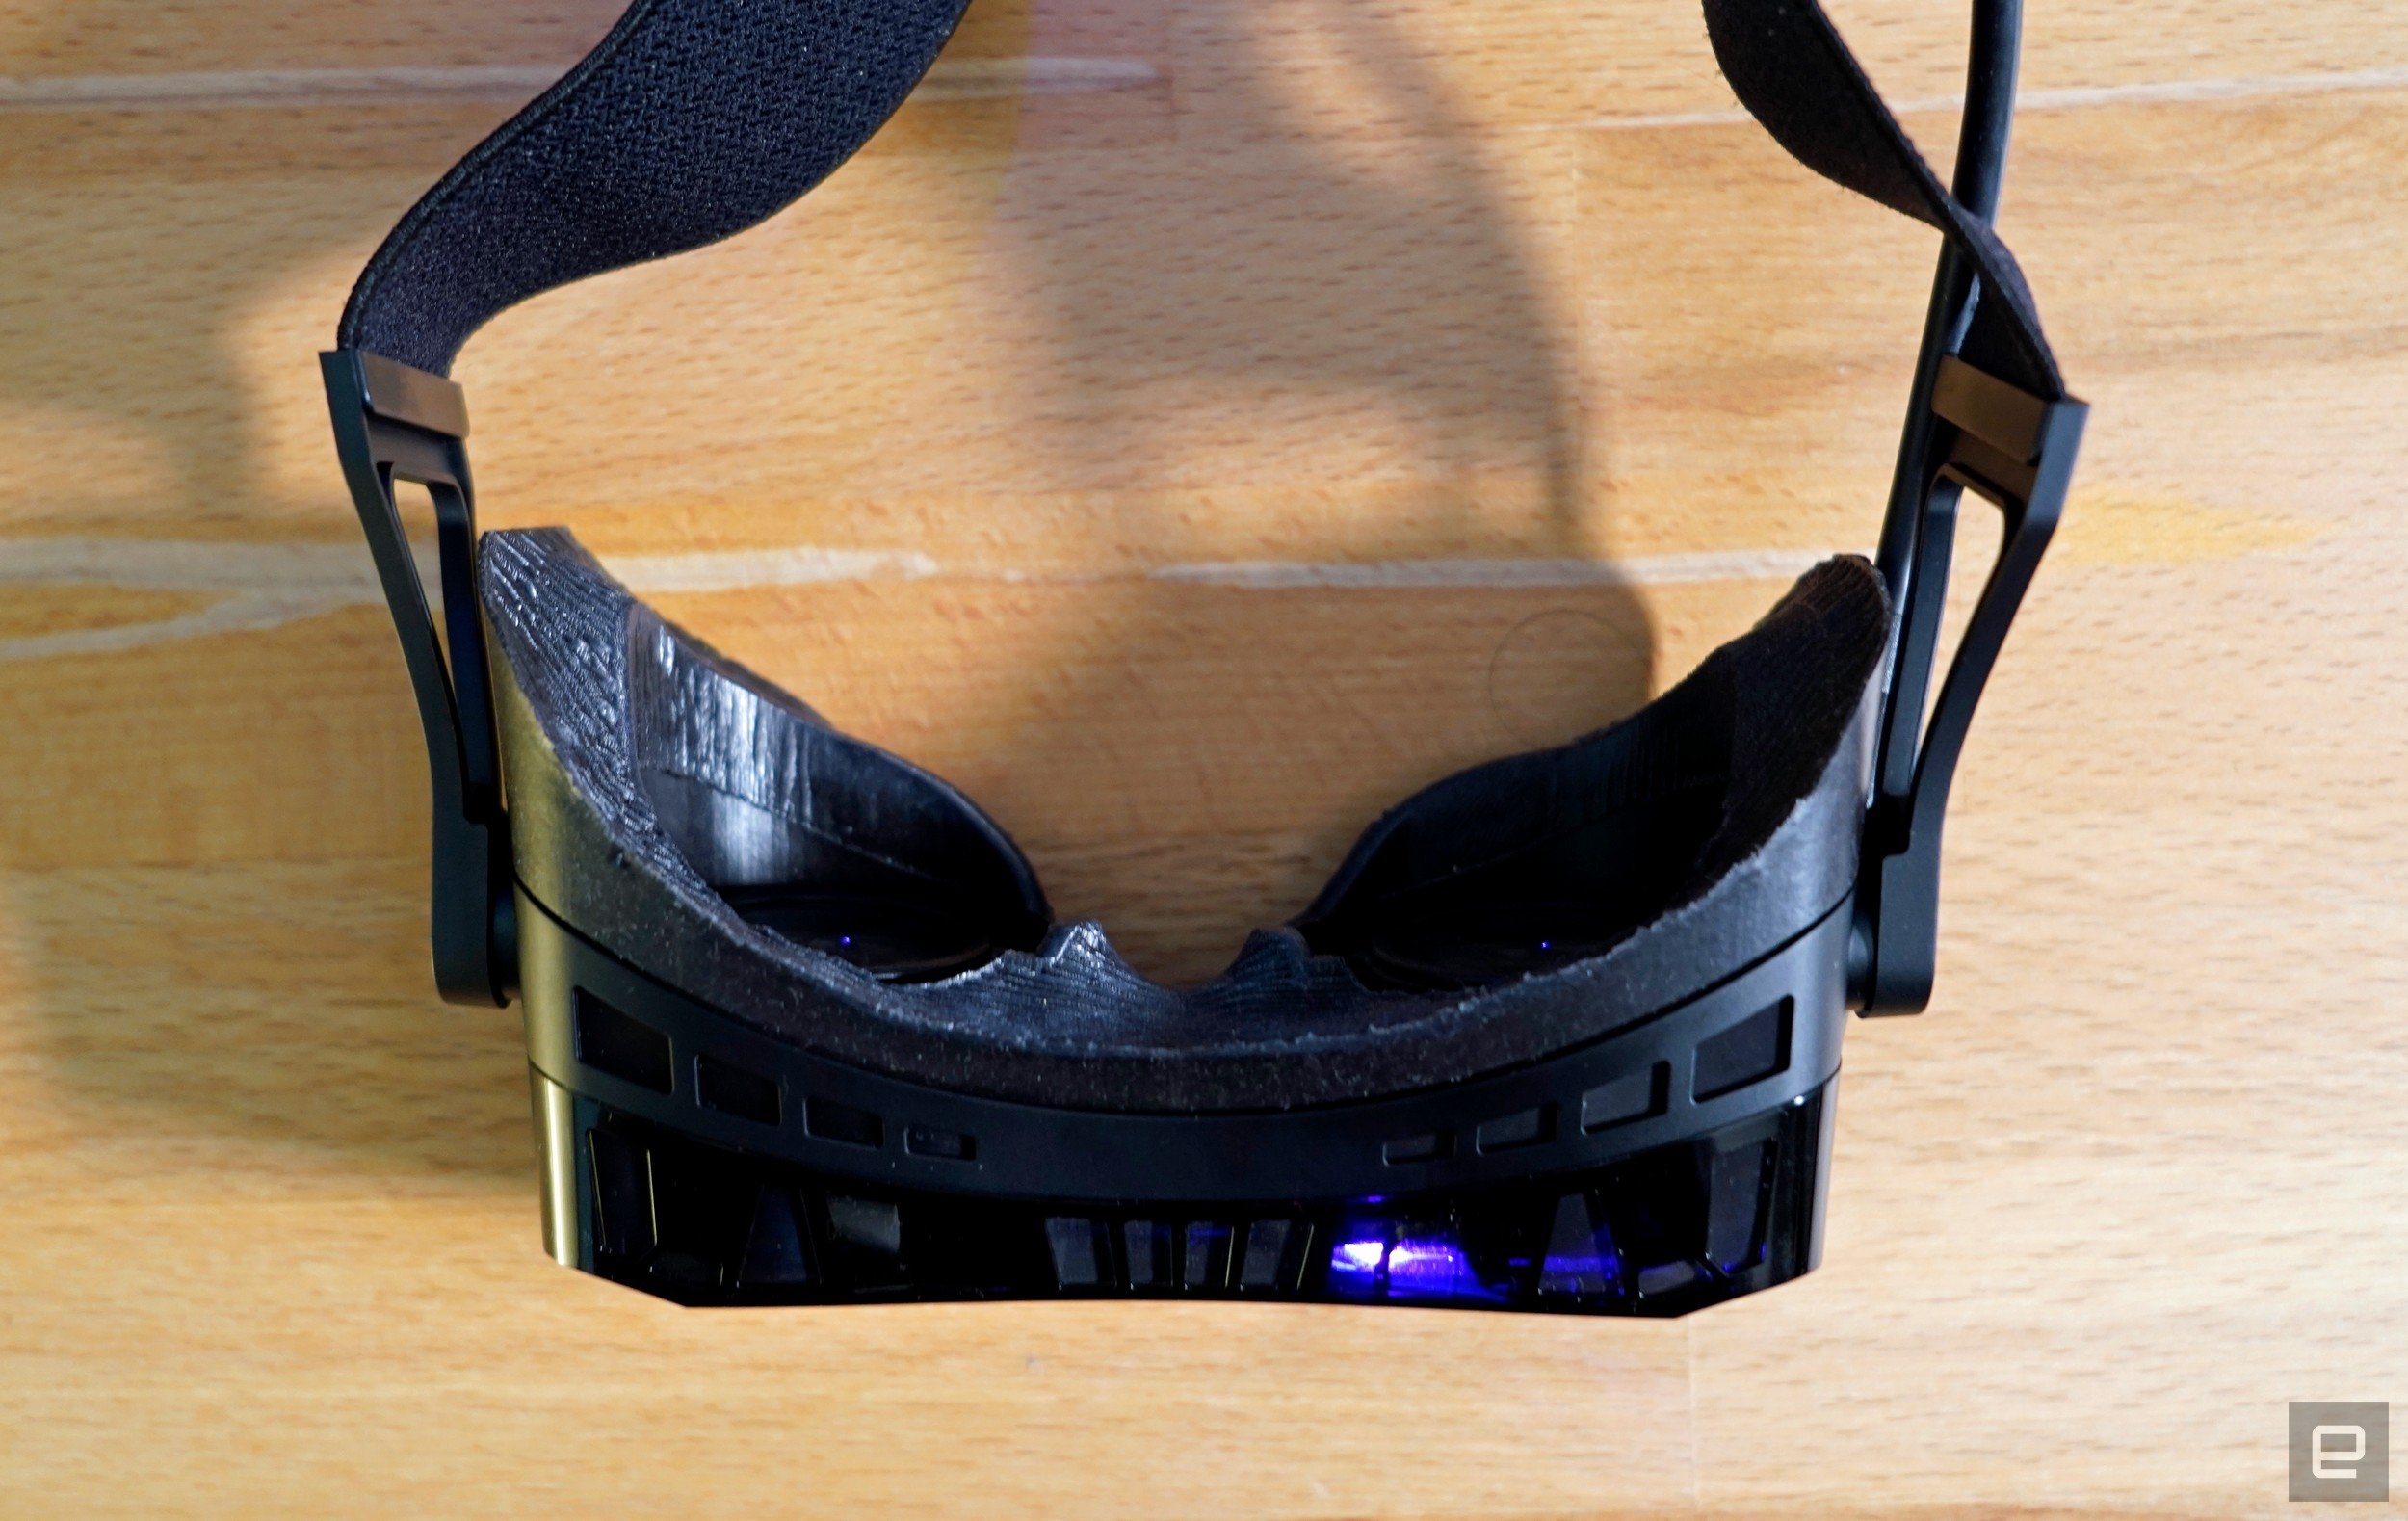 Top view of Beyond VR headset on big screen